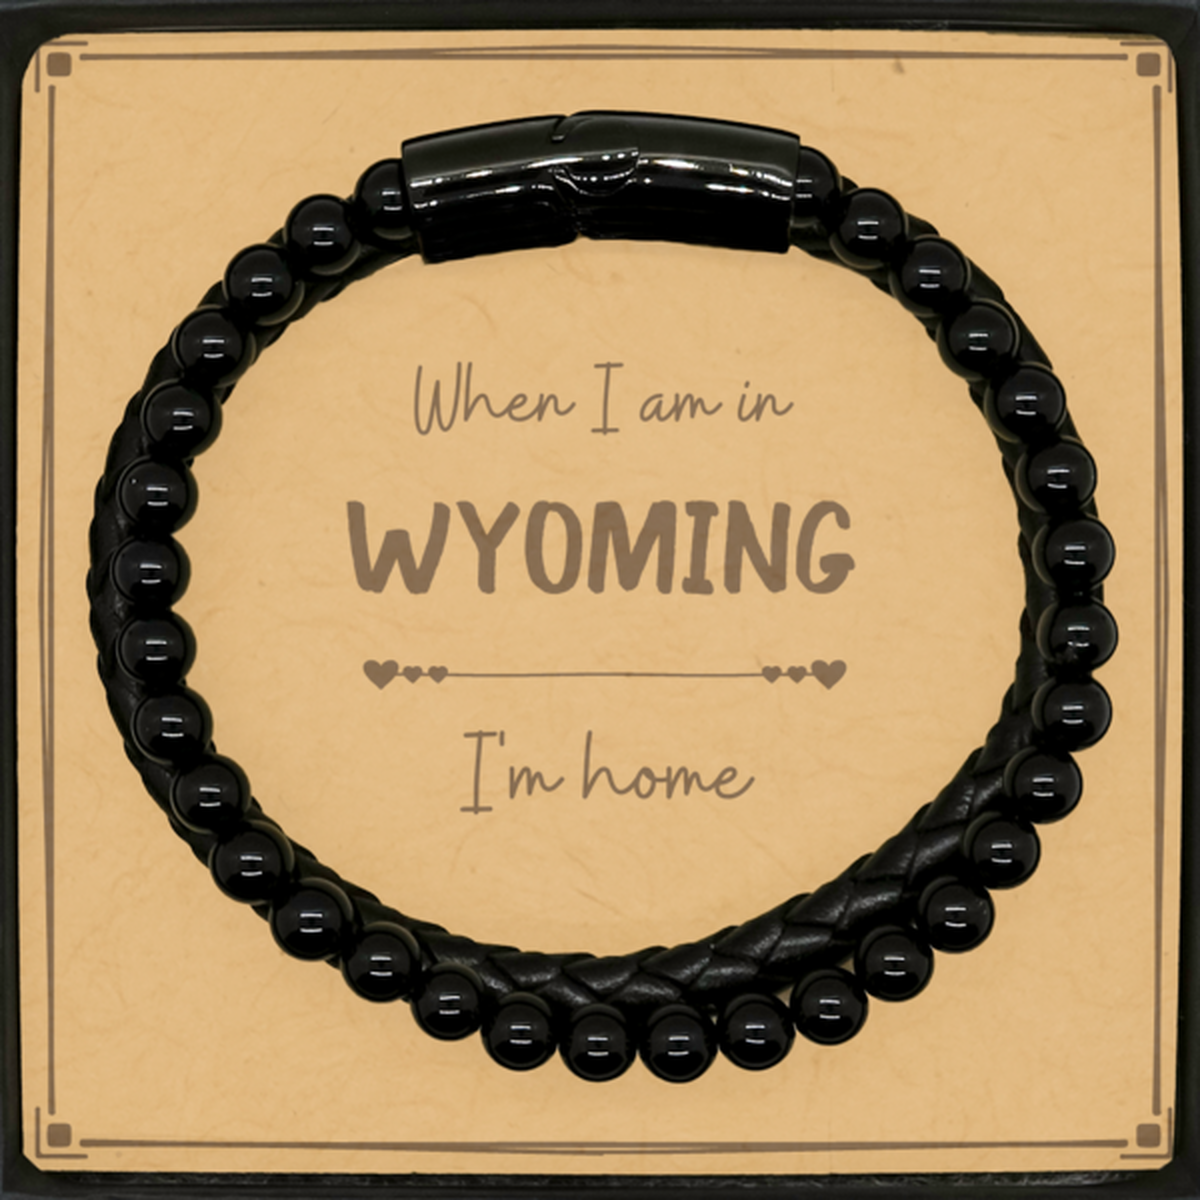 When I am in Wyoming I'm home Stone Leather Bracelets, Message Card Gifts For Wyoming, State Wyoming Birthday Gifts for Friends Coworker